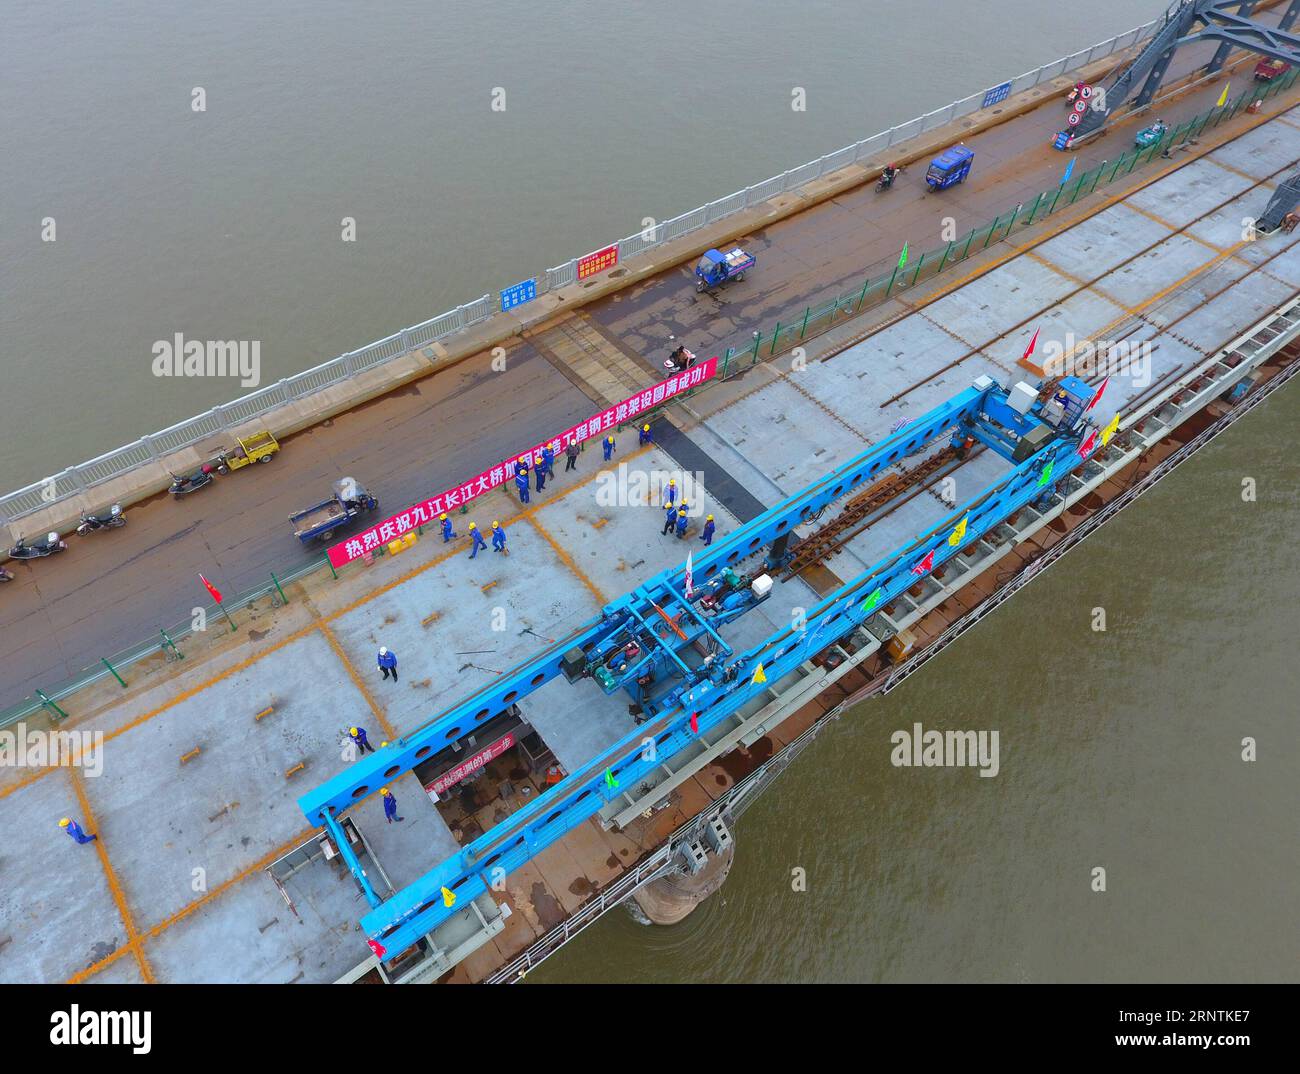 (171112) -- JIUJIANG, Nov. 12, 2017 -- Workers install the last steel bridge deck at the site of a reinforcement project of Jiujiang Yangtze River Bridge in east China s Jiangxi Province, Nov. 12, 2017. Constructors finished installation of steel main girders for the bridge s reinforcement project on Sunday. )(mcg) CHINA-JIANGXI-JIUJIANG-YANGTZE RIVER BRIDGE-REINFORCEMENT (CN) HuxGuolin PUBLICATIONxNOTxINxCHN Stock Photo